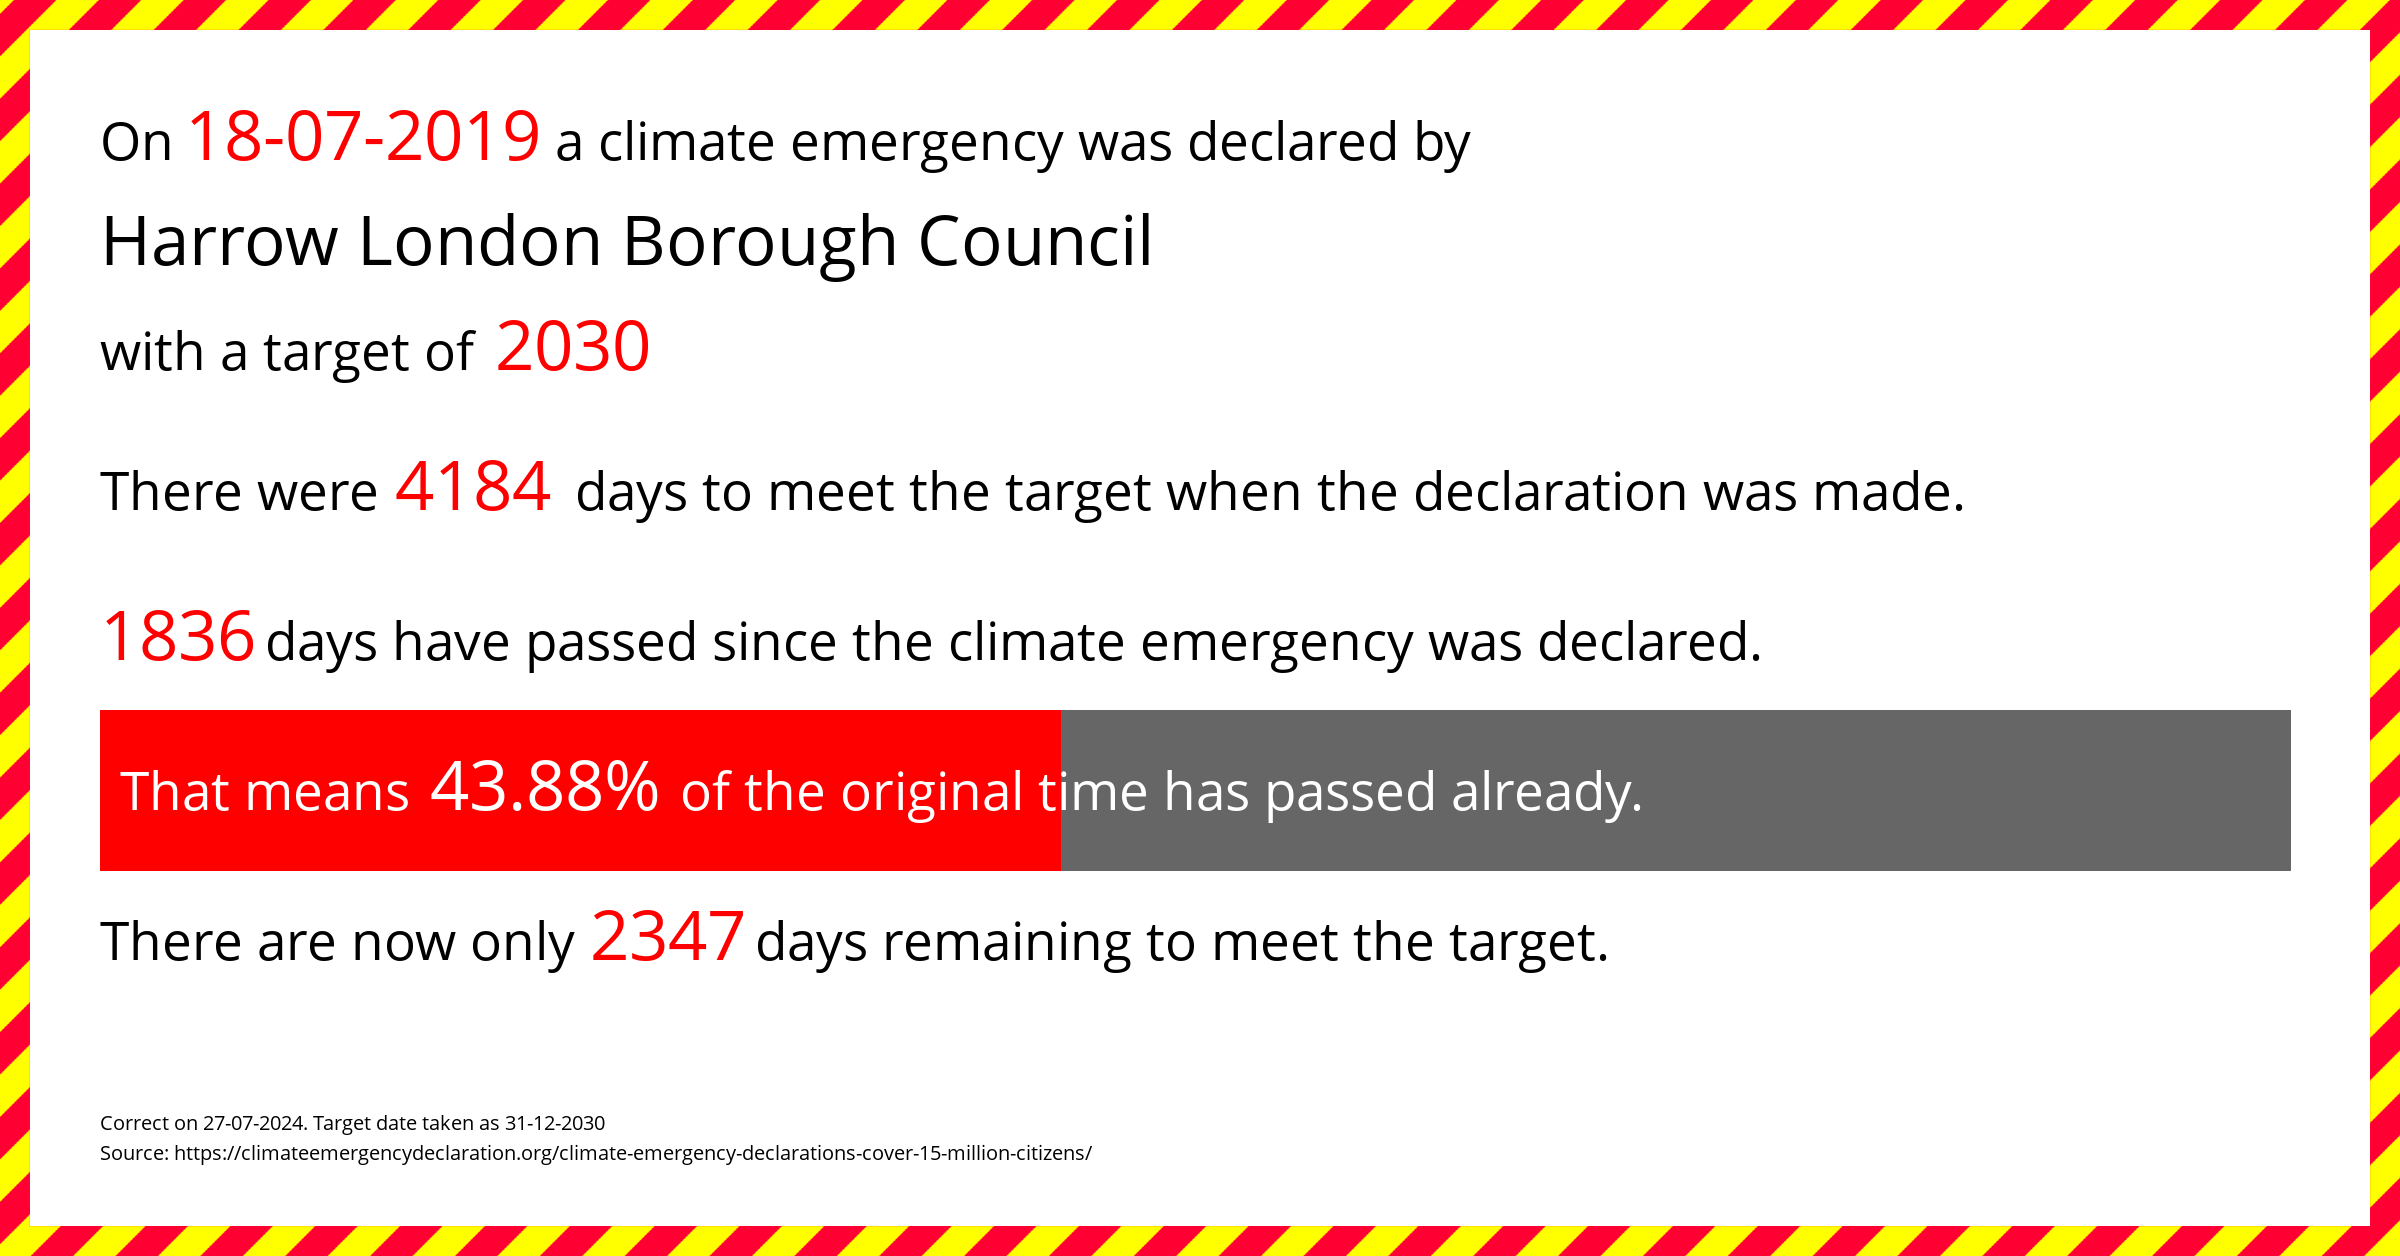 Harrow London Borough Council declared a Climate emergency on Thursday 18th July 2019, with a target of 2030.